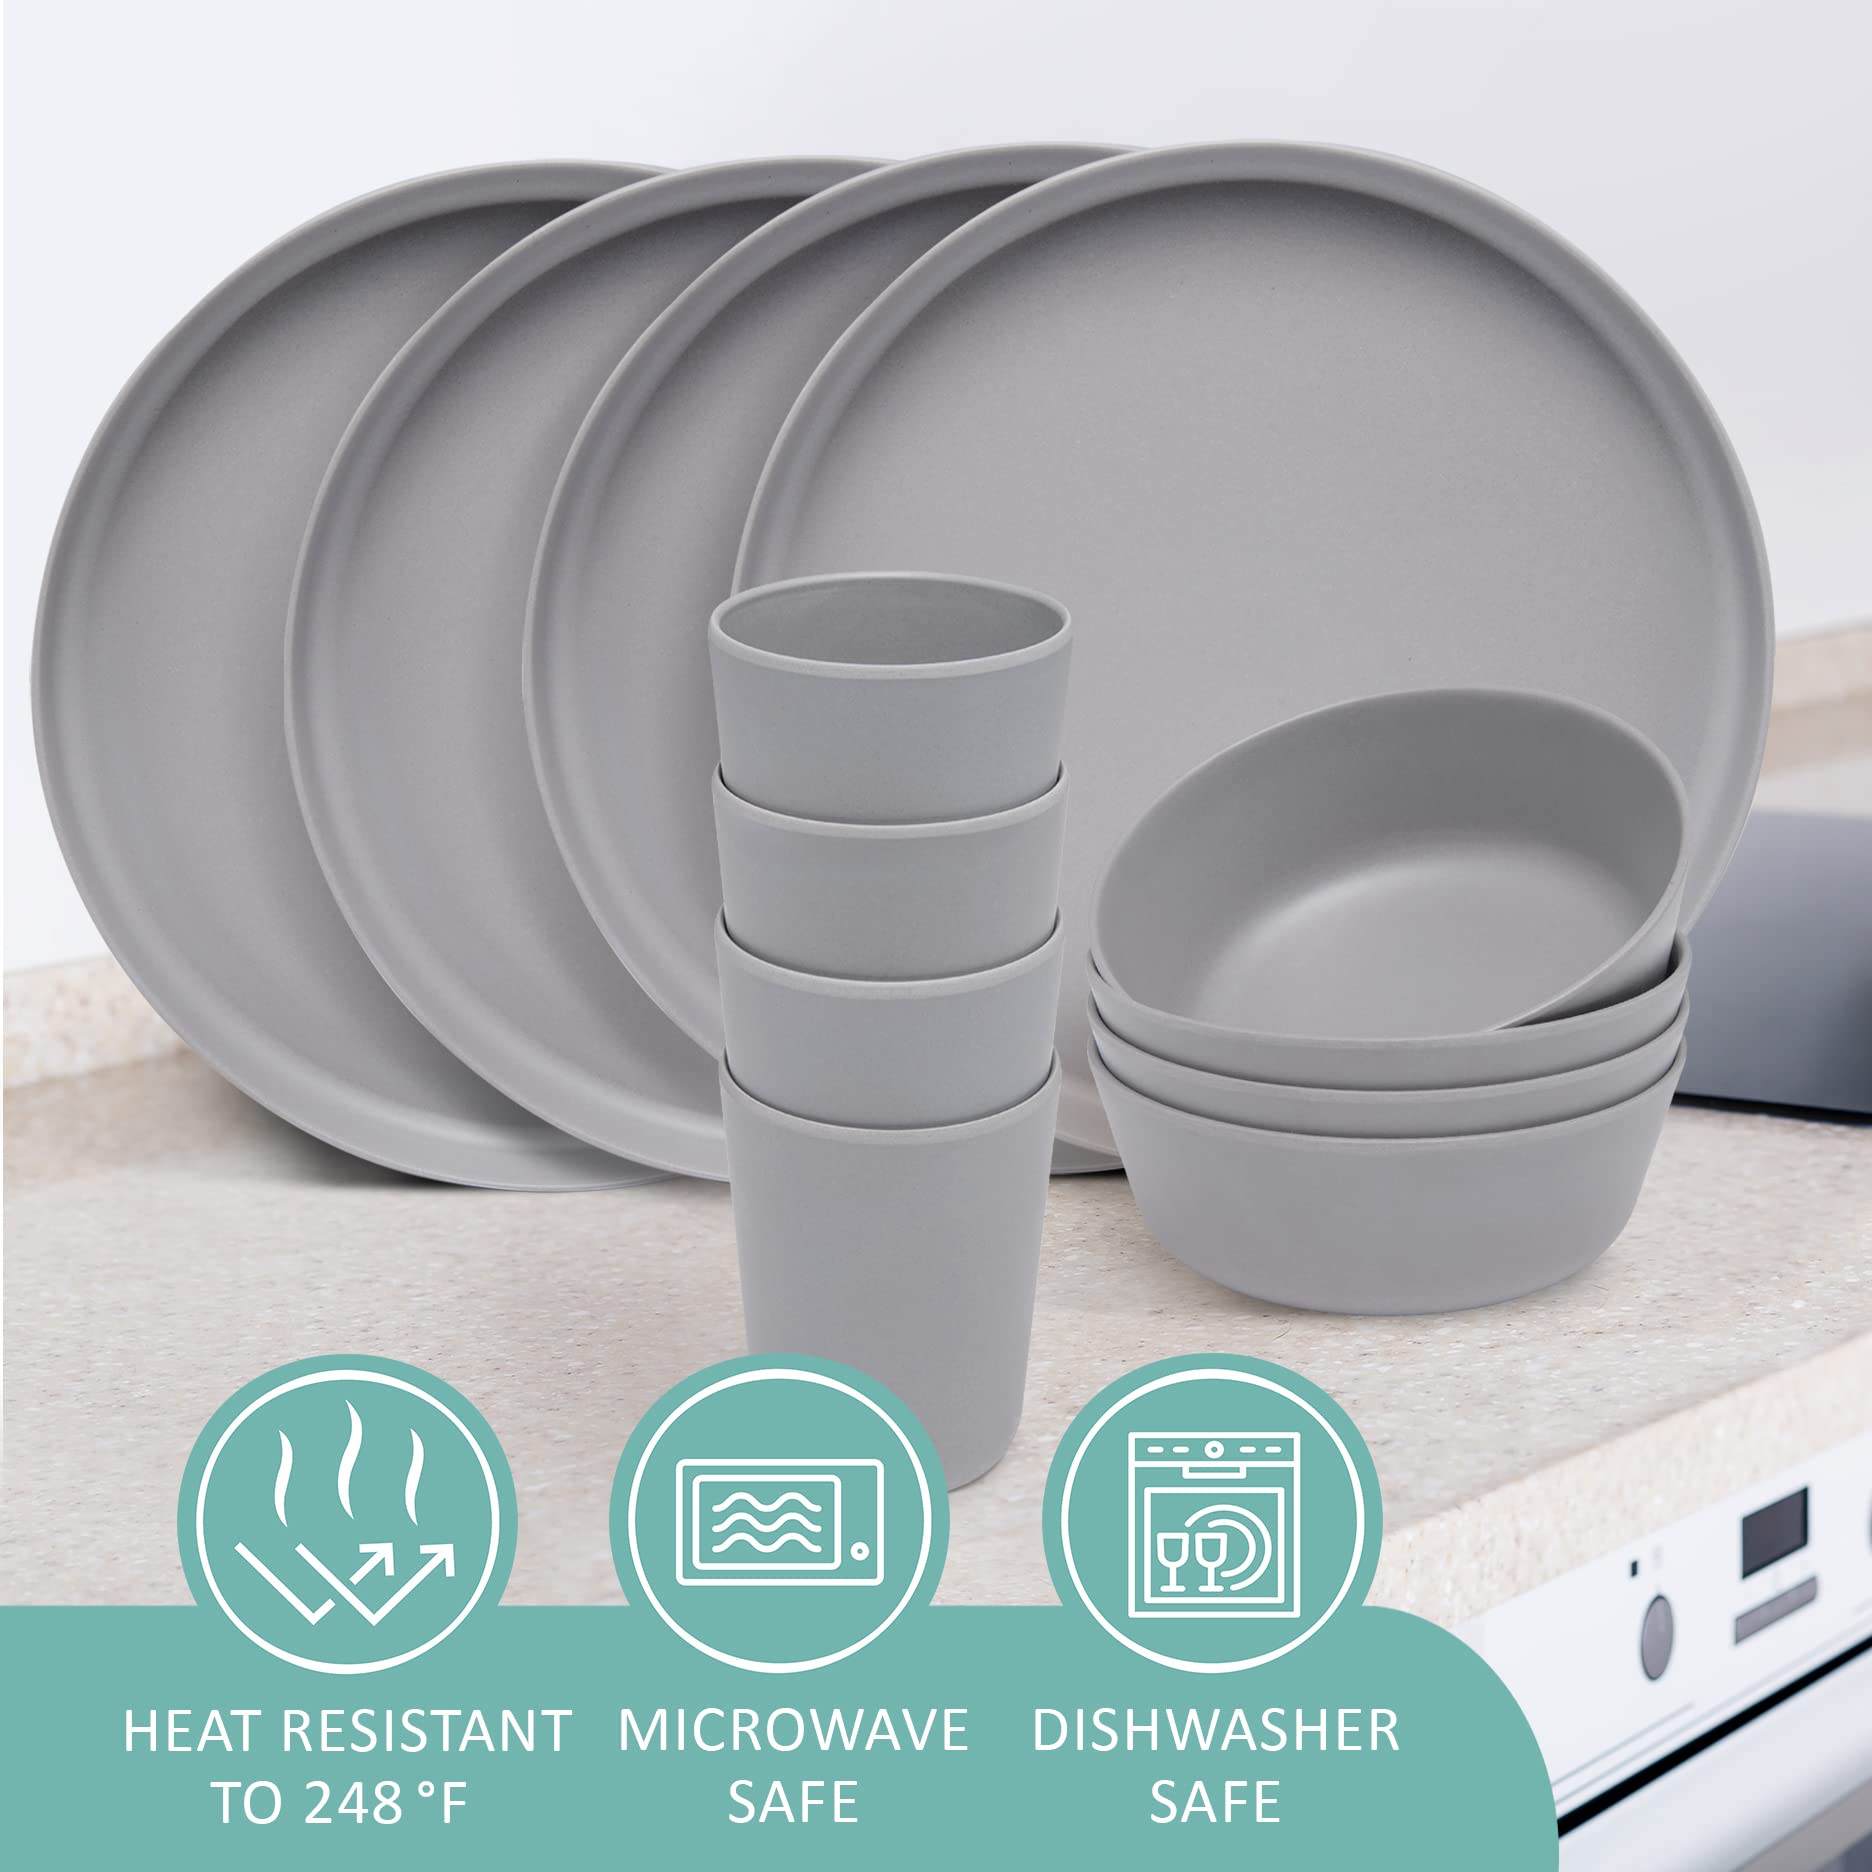 Stephan Roberts Bamboo Dinnerware Set, Eco-Friendly Bamboo Fiber Dinnerware, Dishes Set for 4, Includes Plates, Bowls & Cups, Reusable Unbreakable Dishware Set, Gray, 12PC Dinner Set